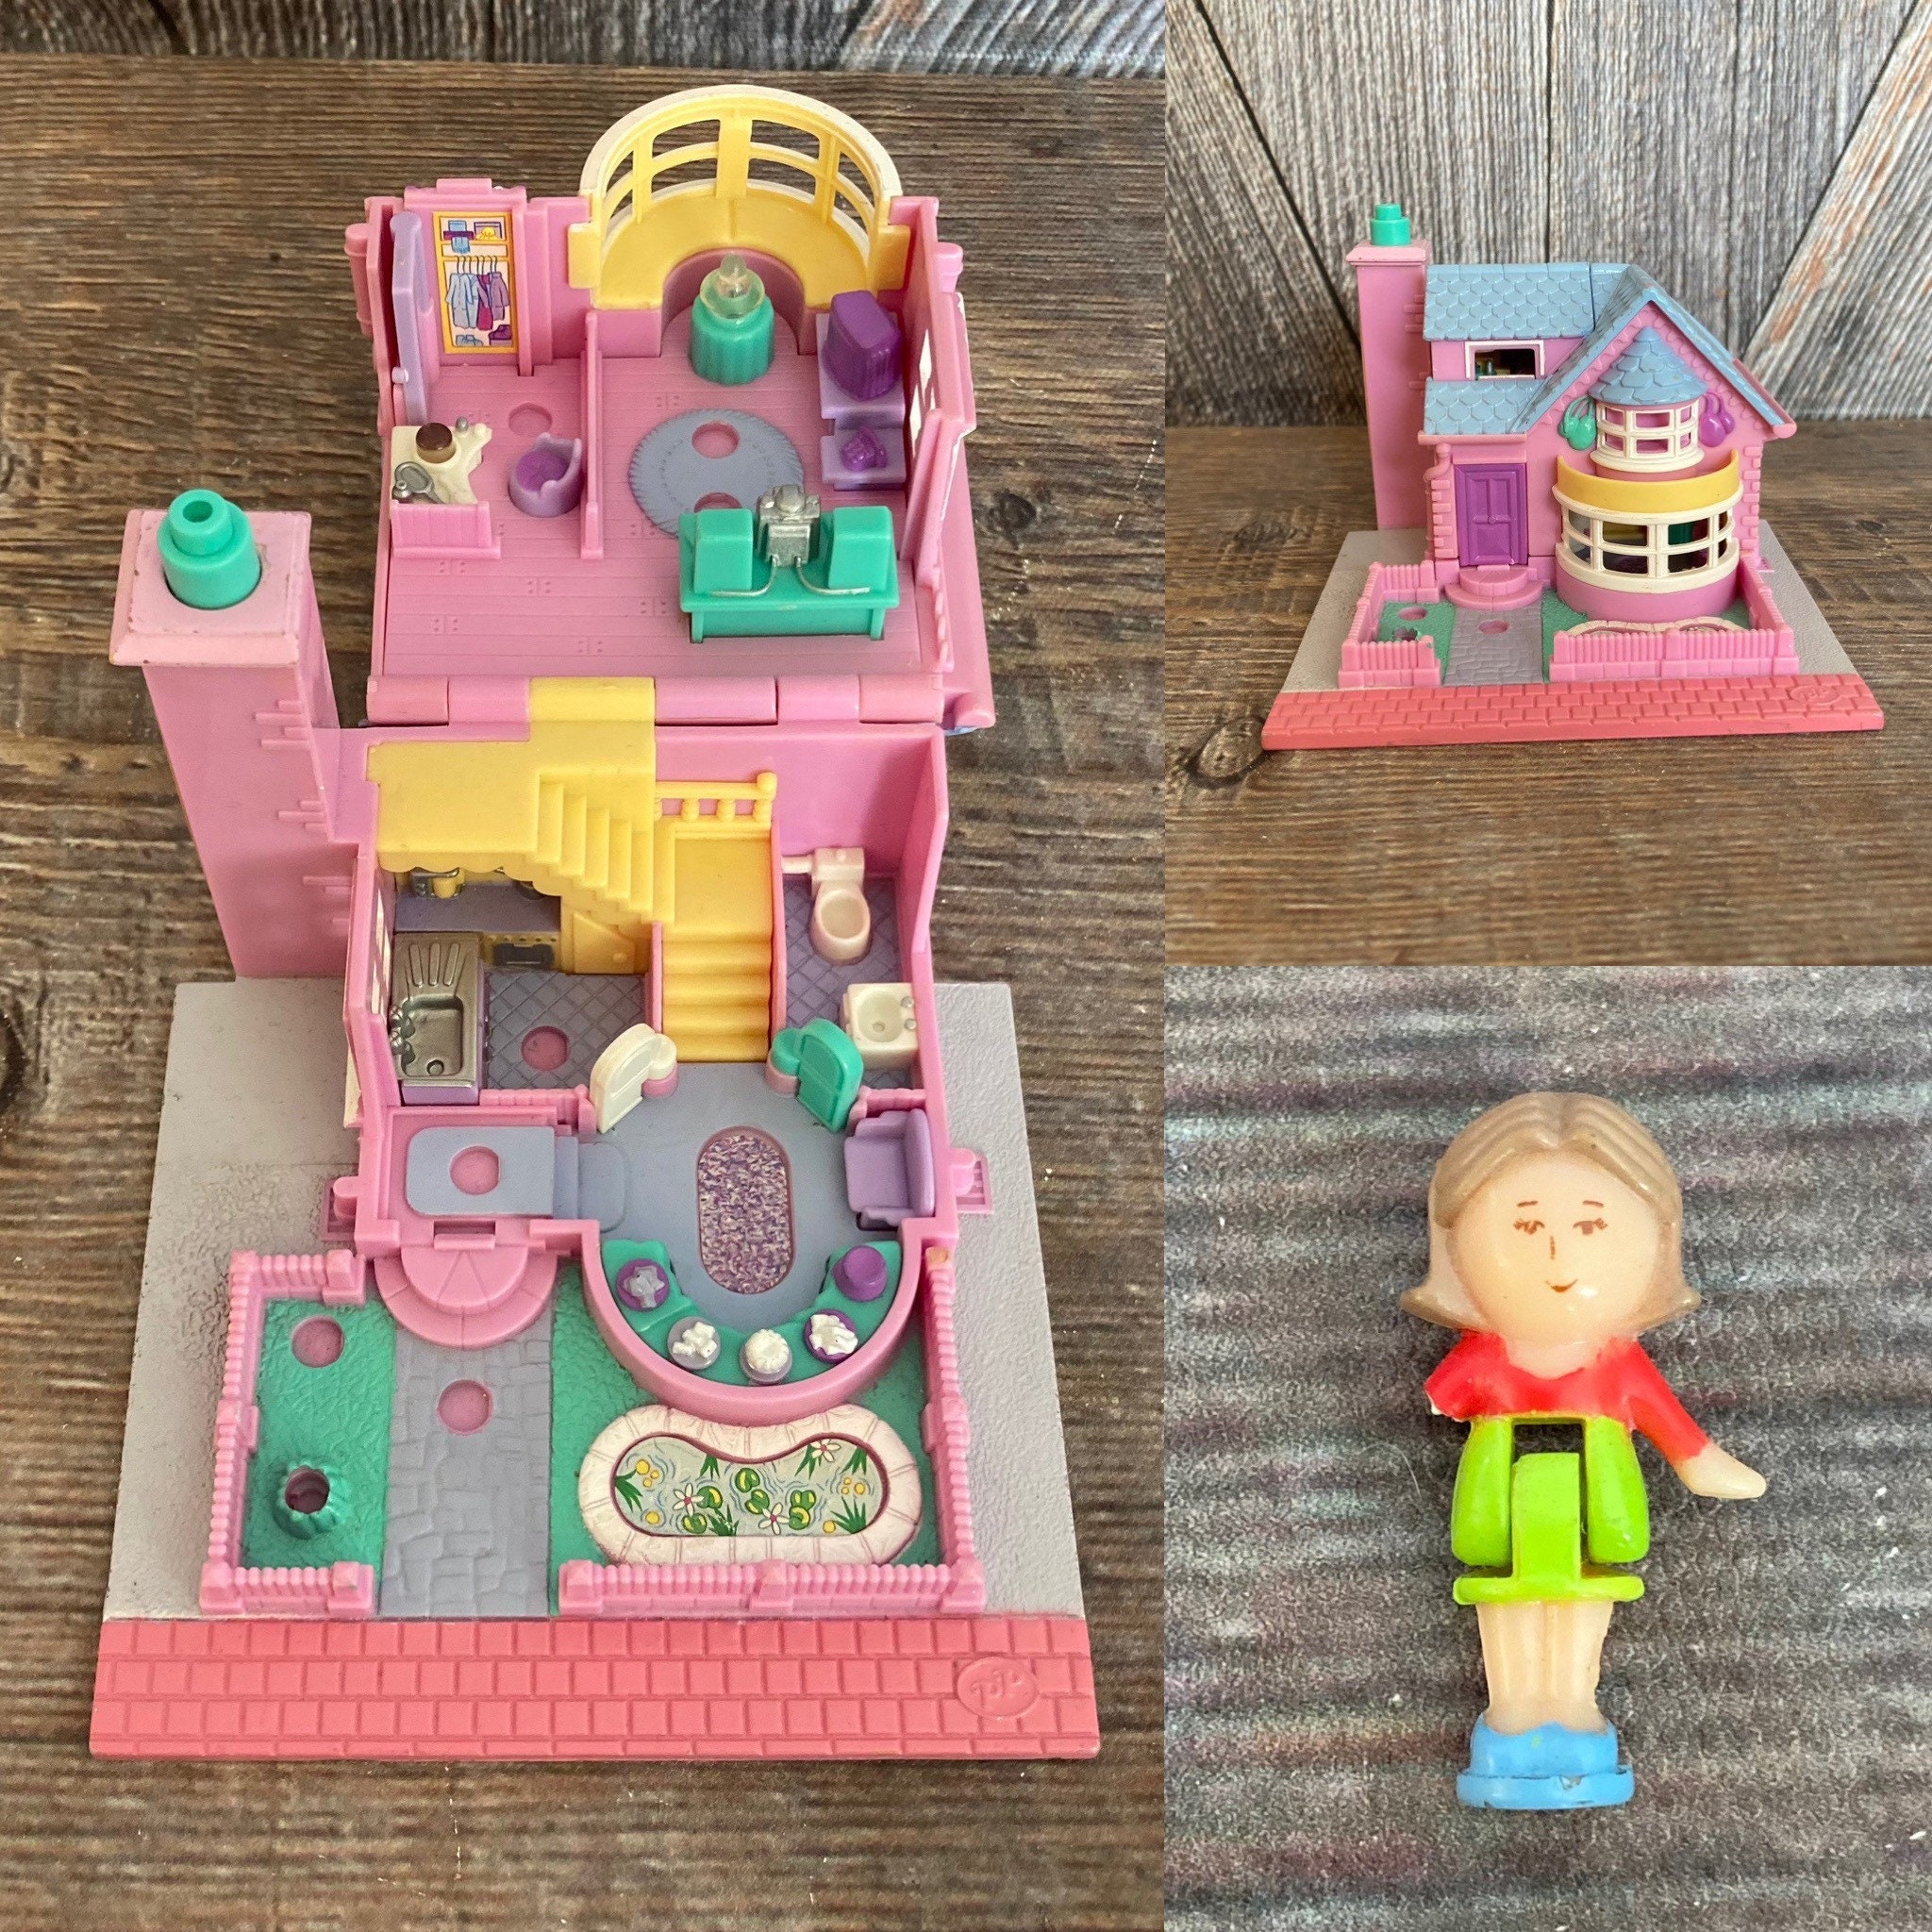 Polly Pocket Keepsake Collection Starlight Dinner Party Compact Heritage  Playset